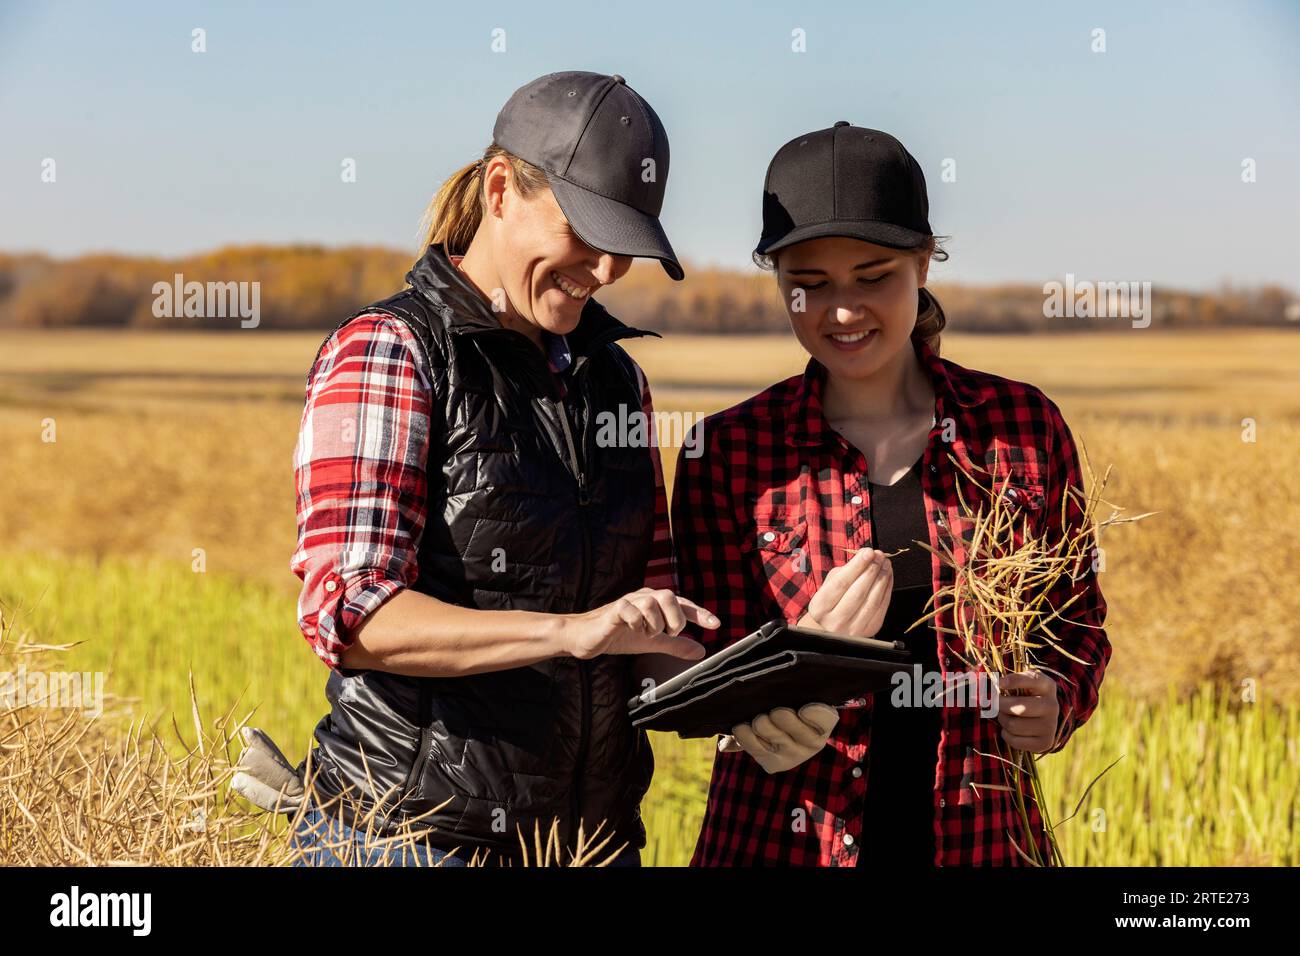 A woman farmer standing in the fields teaching her apprentice about modern farming techniques for canola crops using wireless technologies and agri... Stock Photo